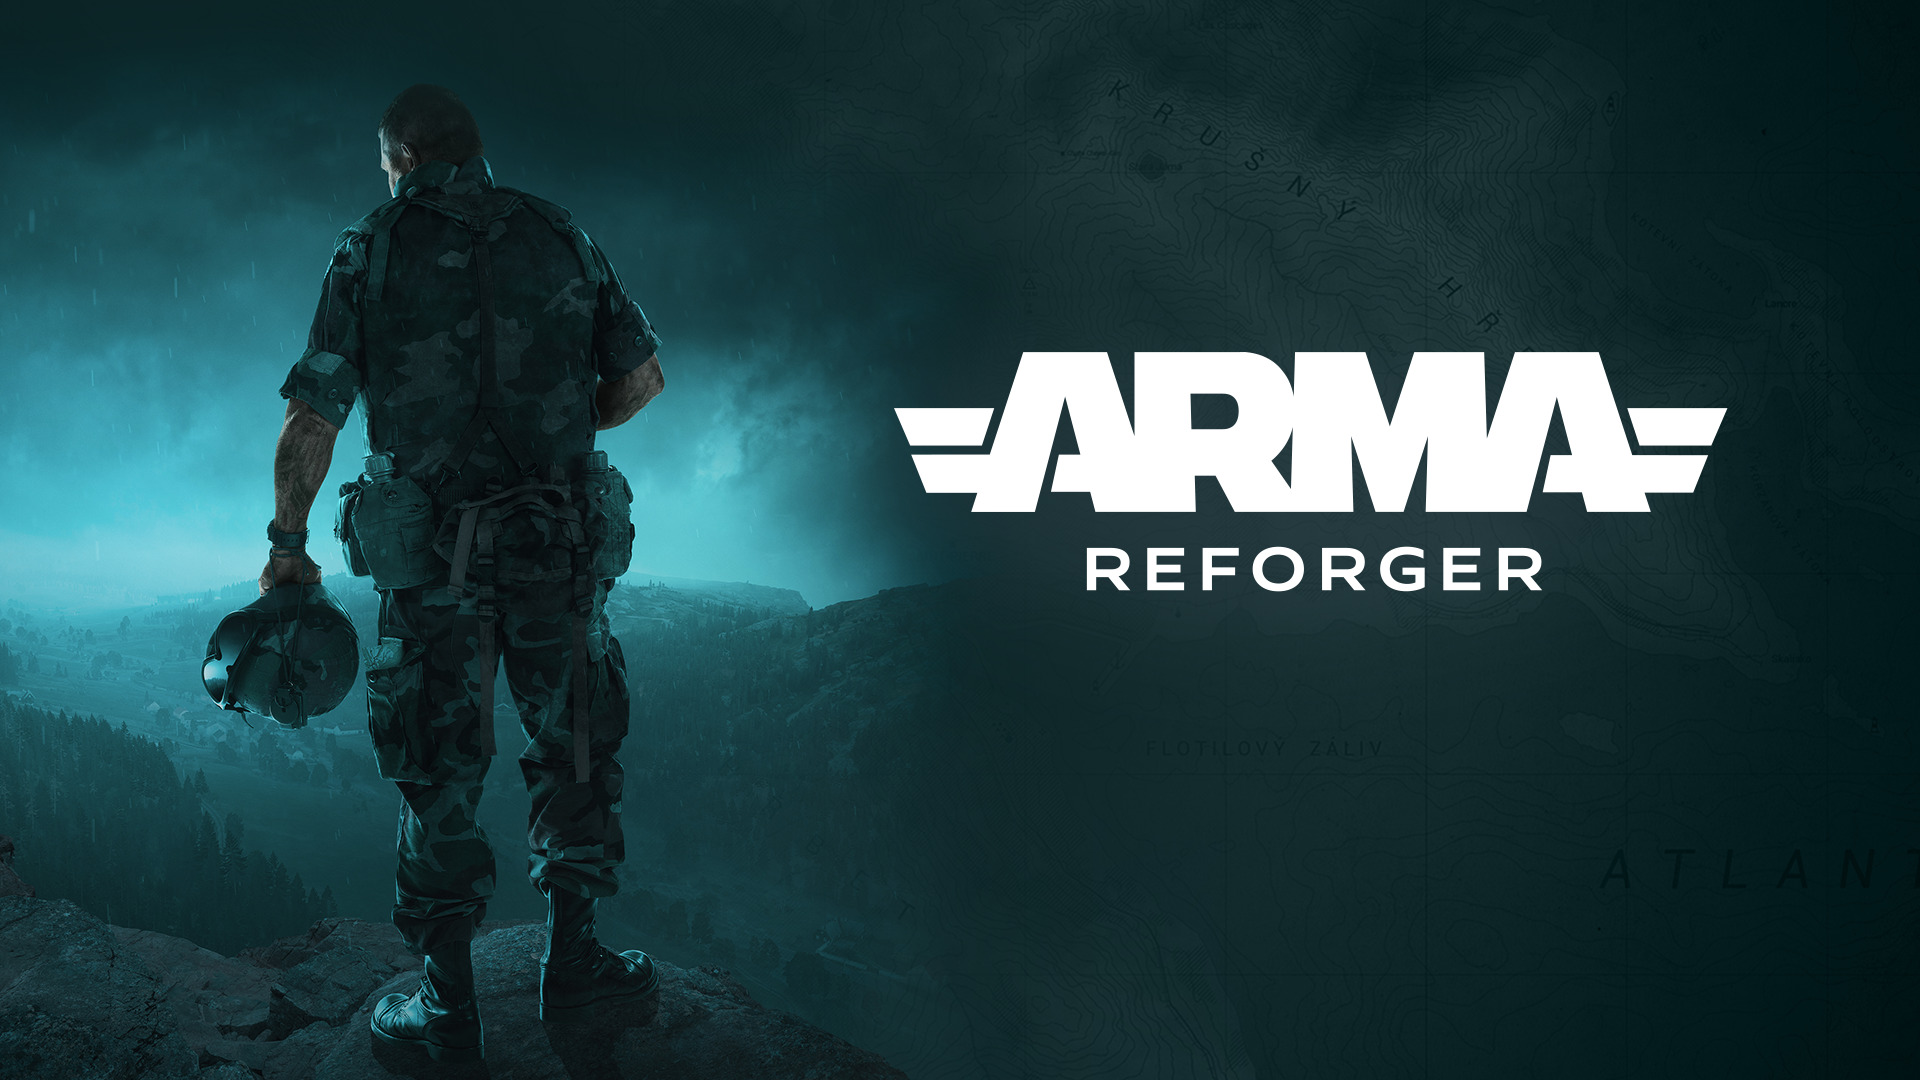 Video Game Arma Reforger HD Wallpaper | Background Image